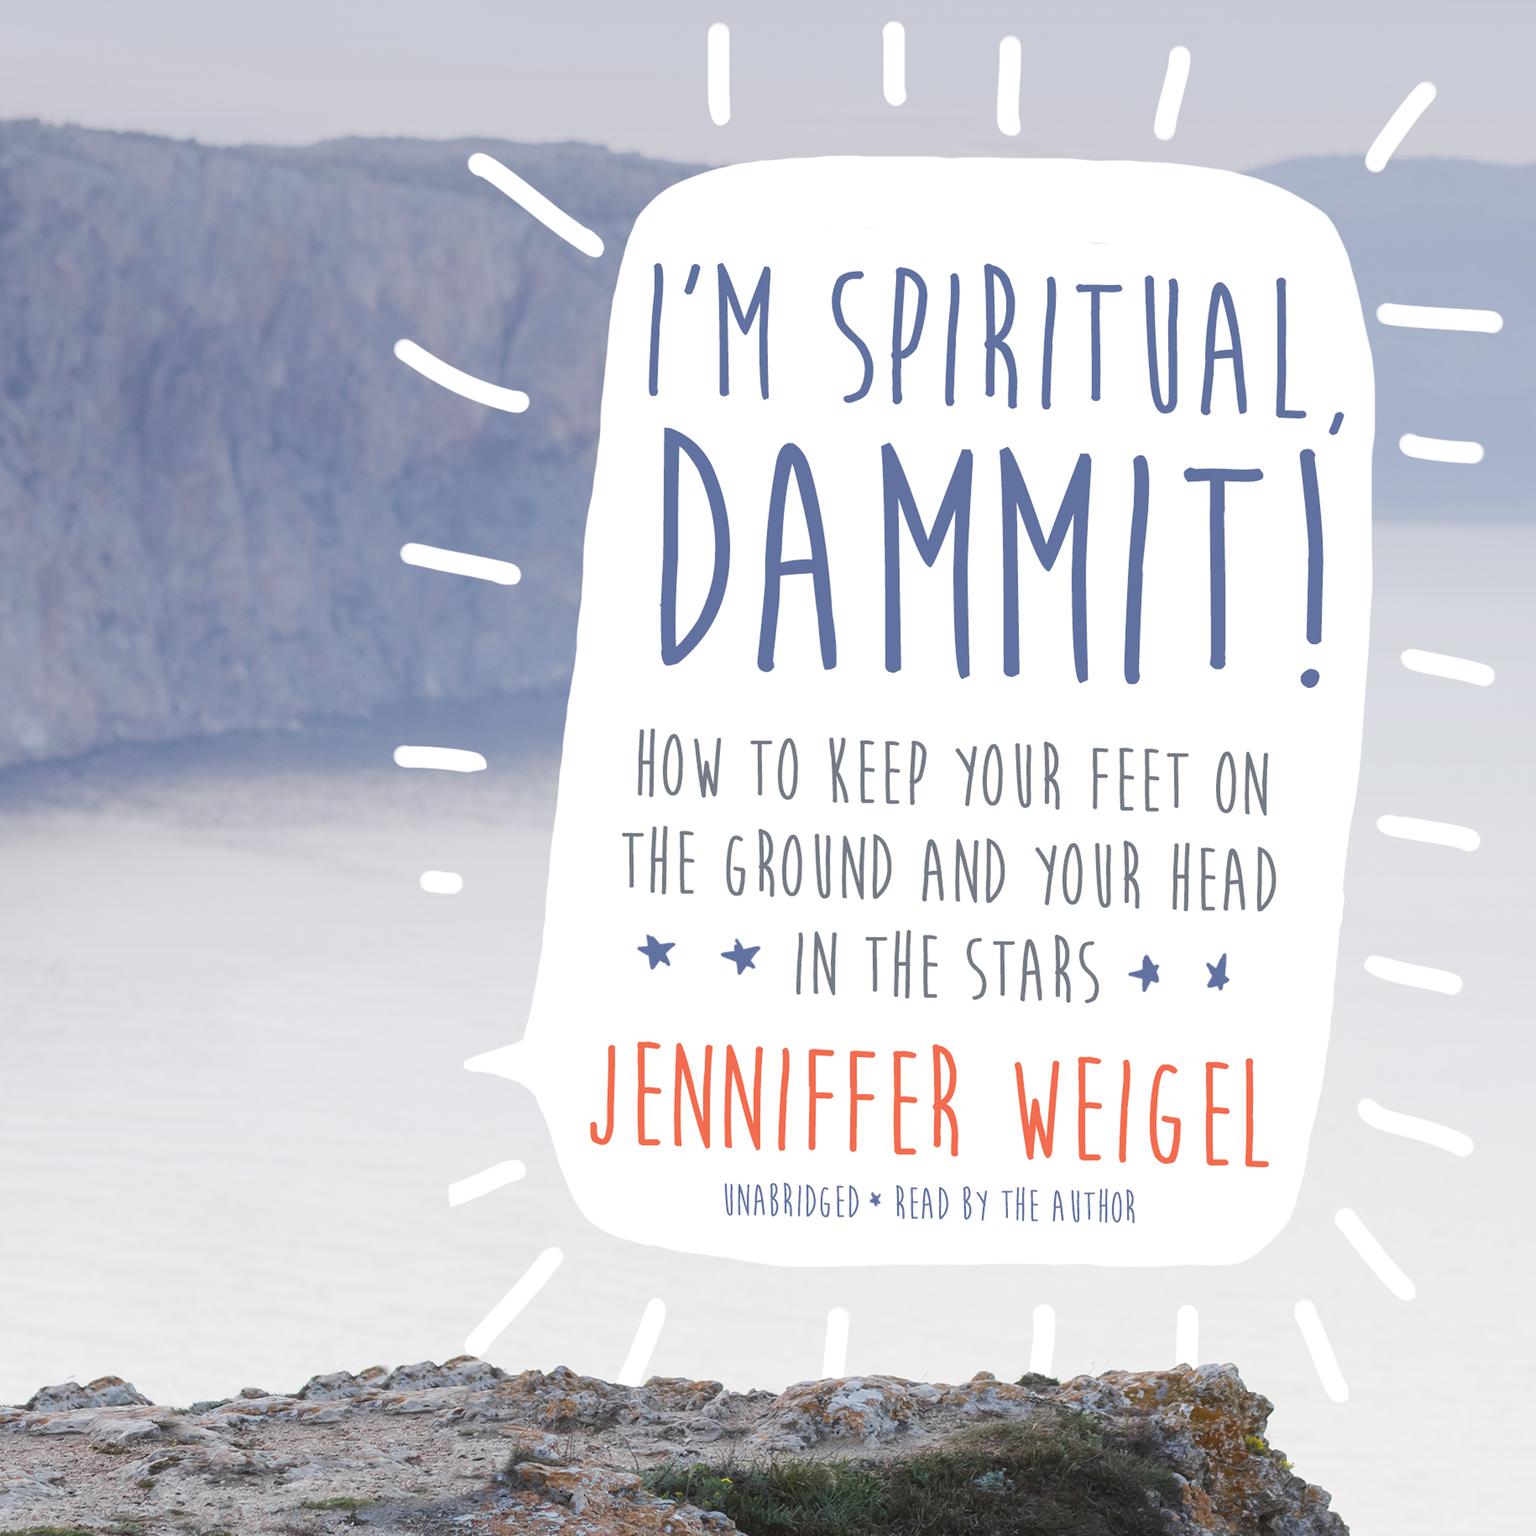 I’m Spiritual, Dammit!: How to Keep Your Feet on the Ground and Your Head in the Stars Audiobook, by Jenniffer Weigel